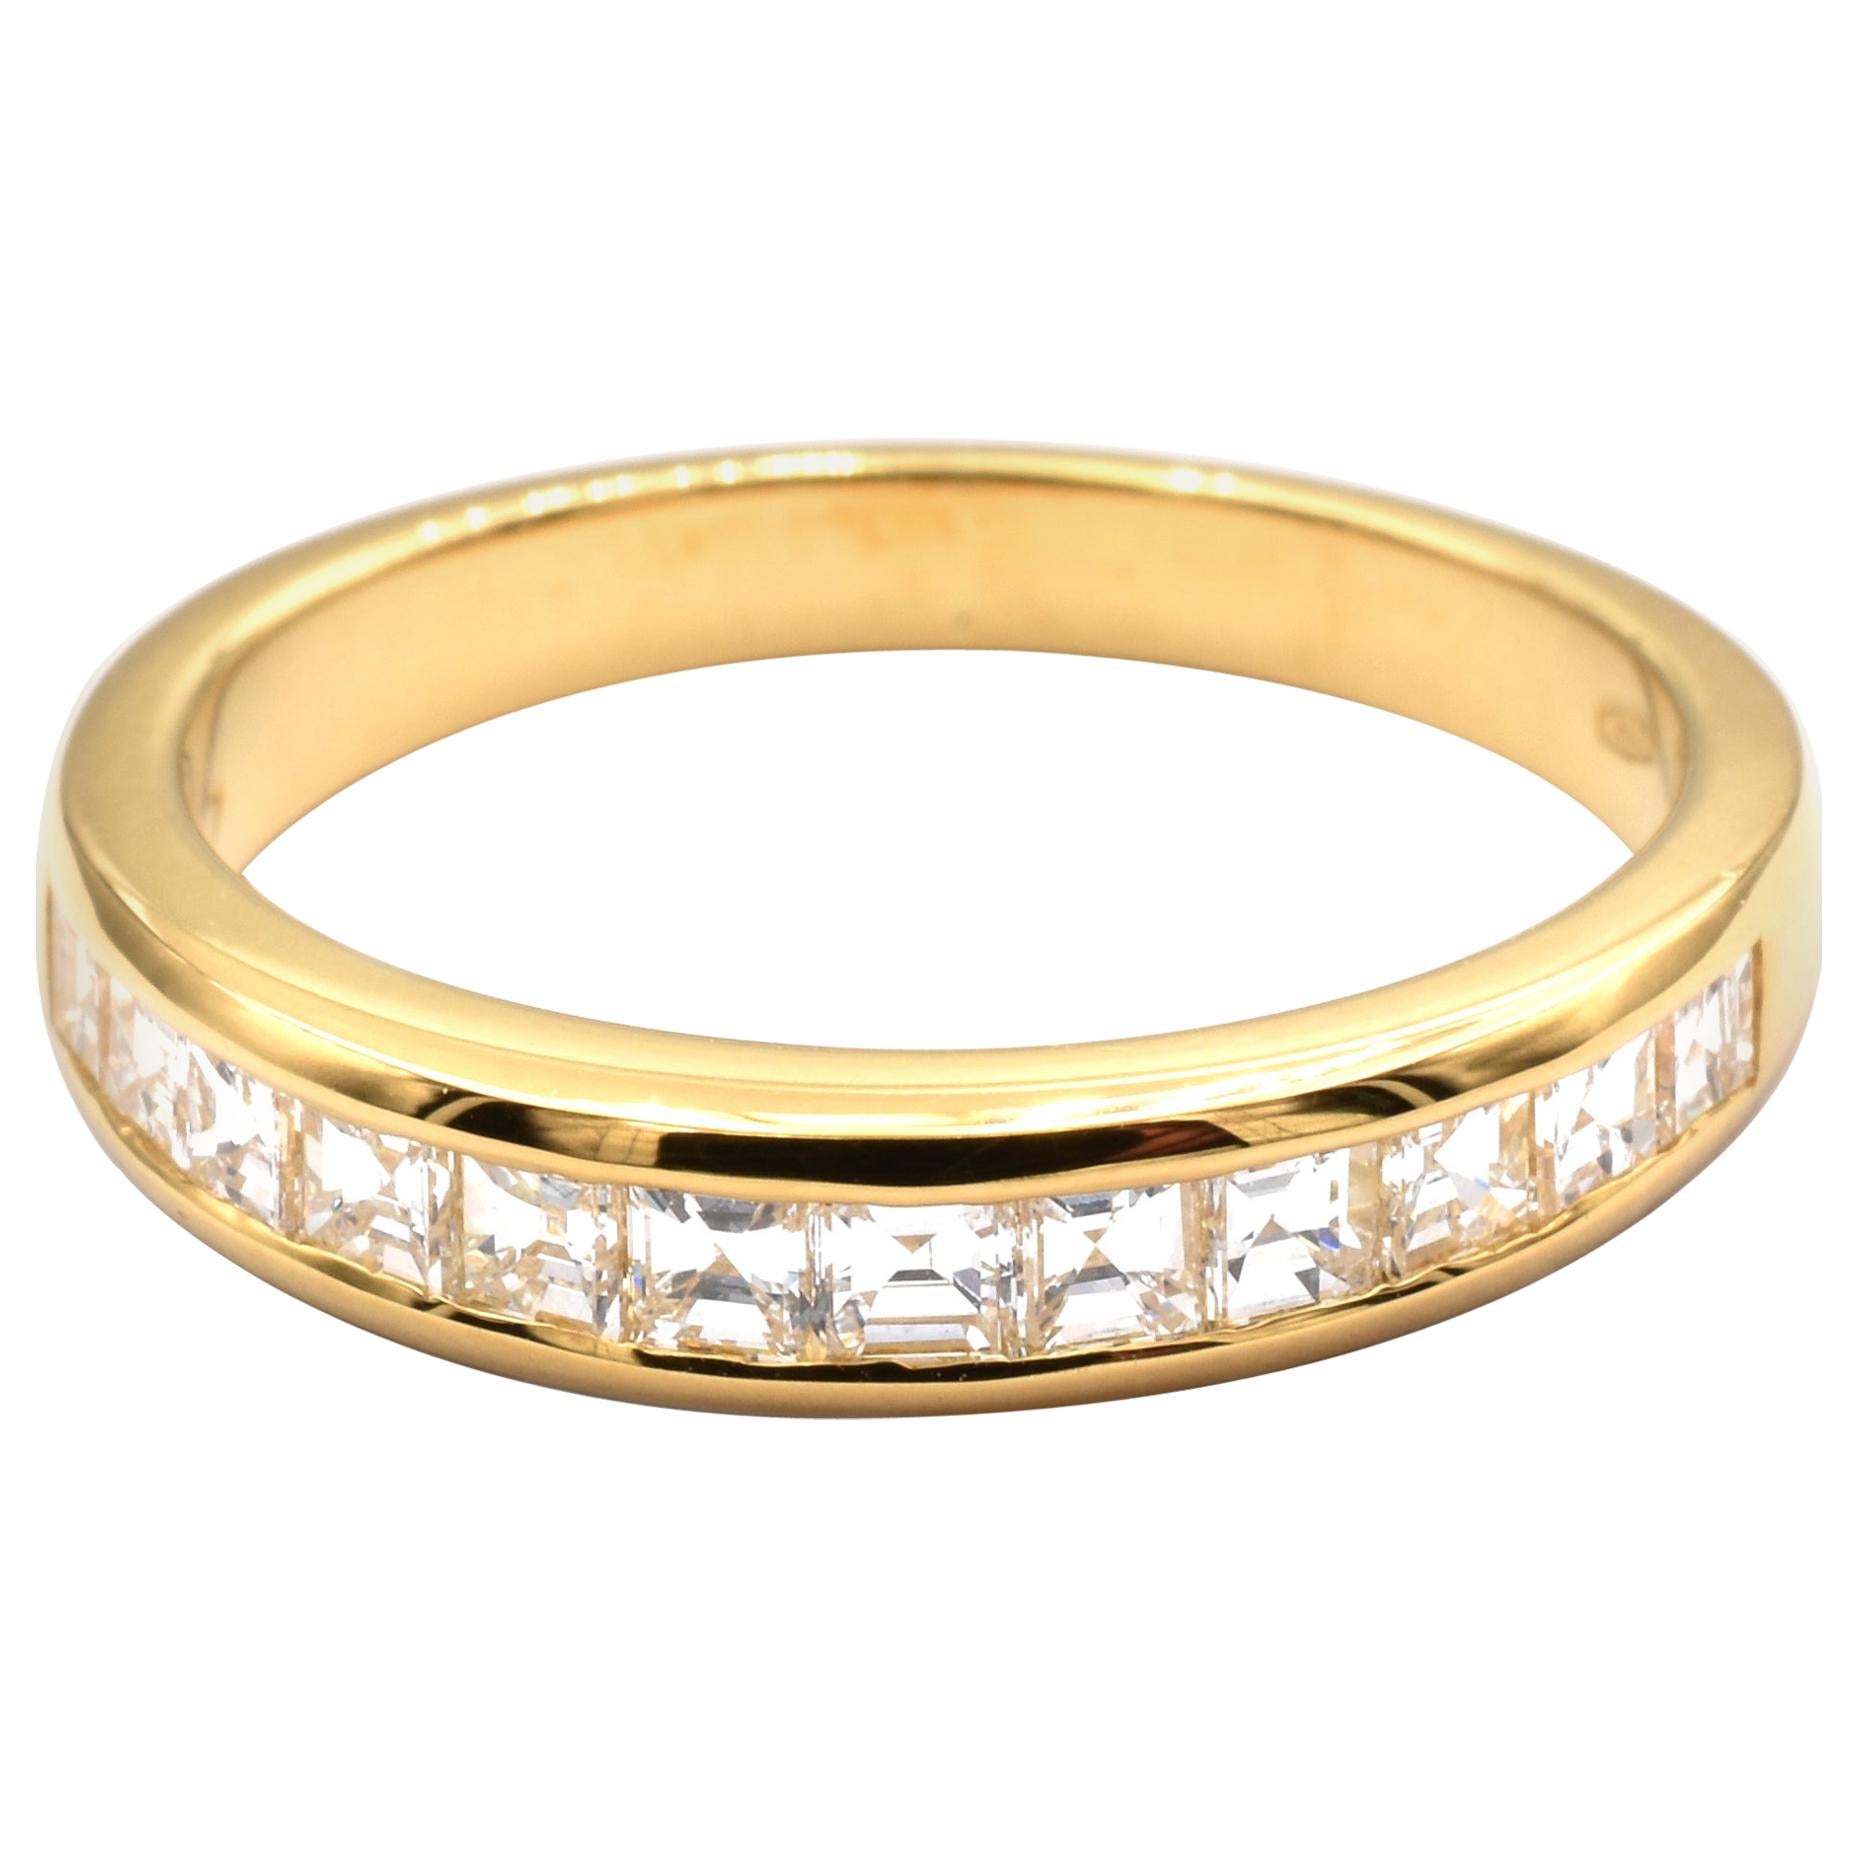 Gilberto Cassola Square Cut Diamonds Yellow Gold Ring Made in Italy